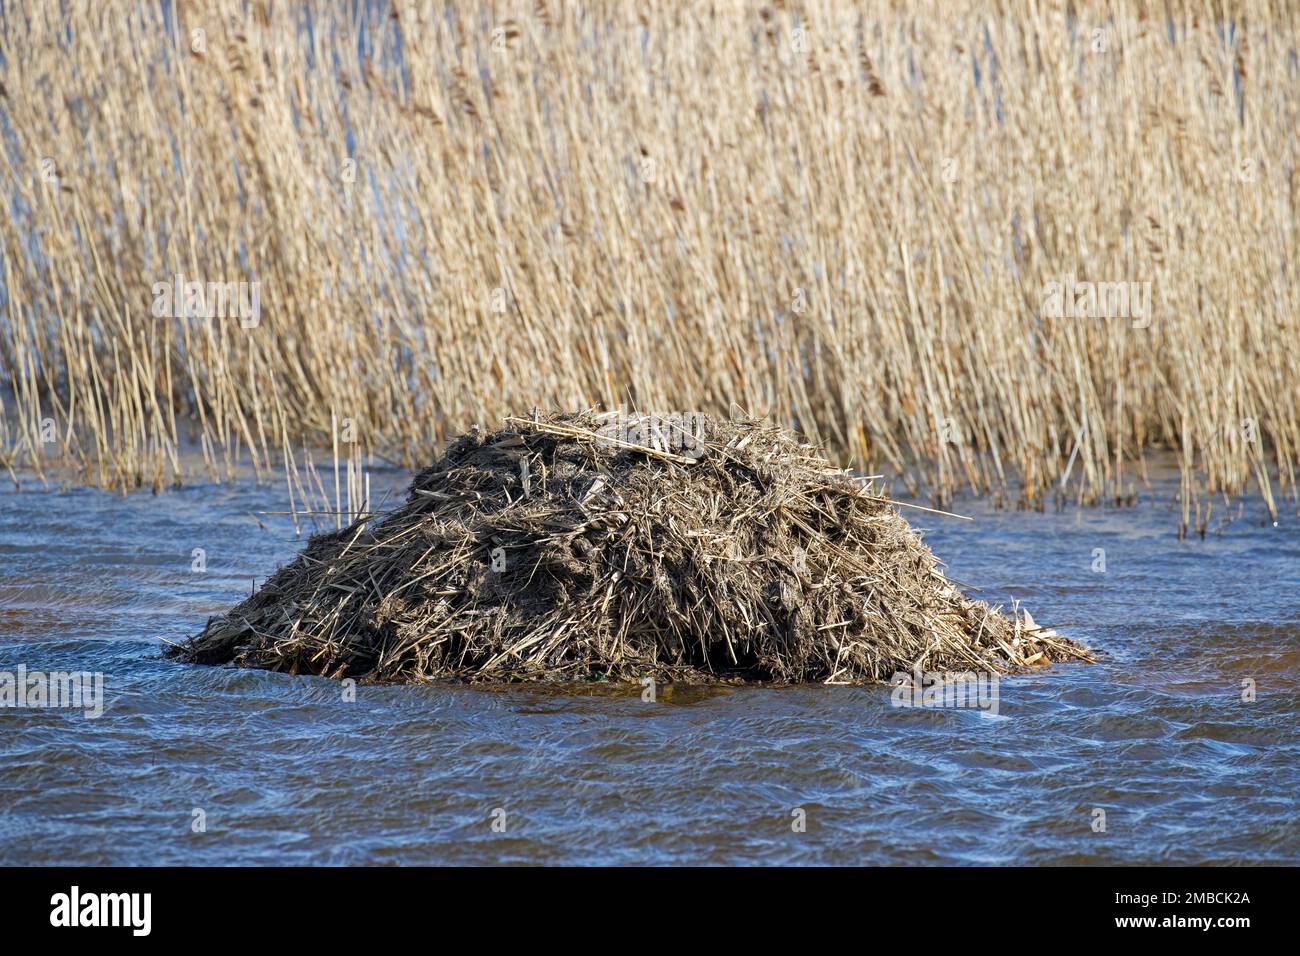 Muskrat (Ondatra zibethicus) lodge, nest build from reed and other vegetation in marshland / wetland / swamp Stock Photo